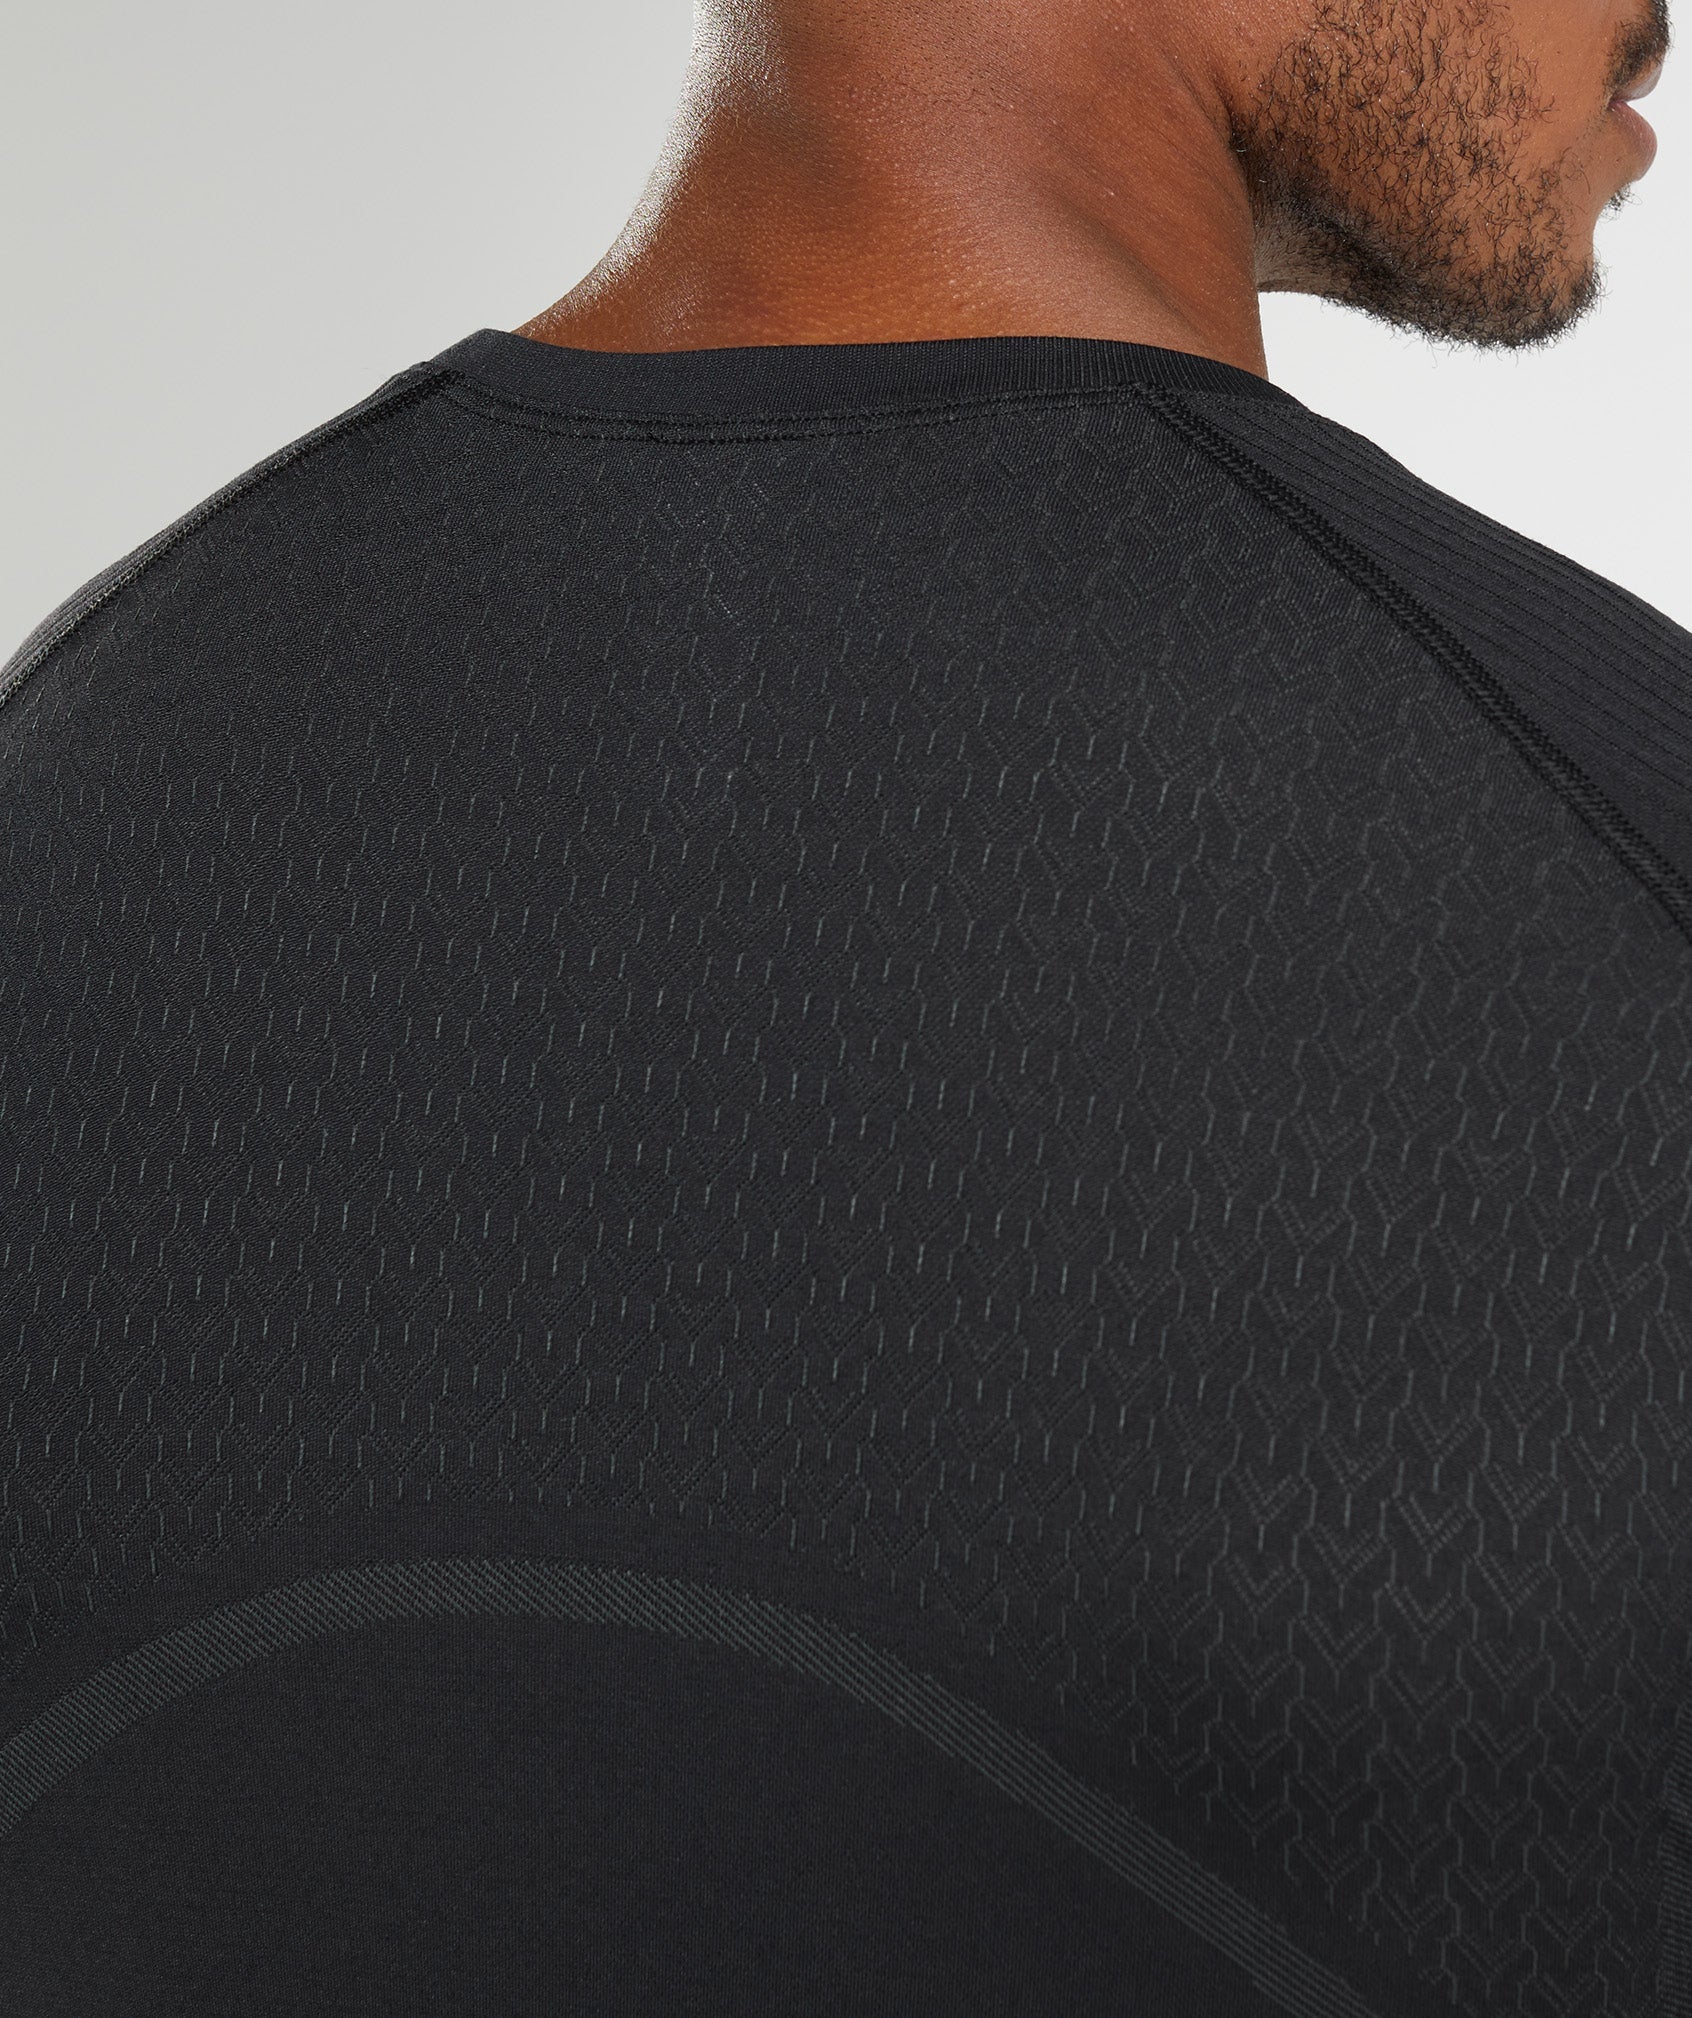 315 Seamless T-Shirt in Black/Charcoal Grey - view 5